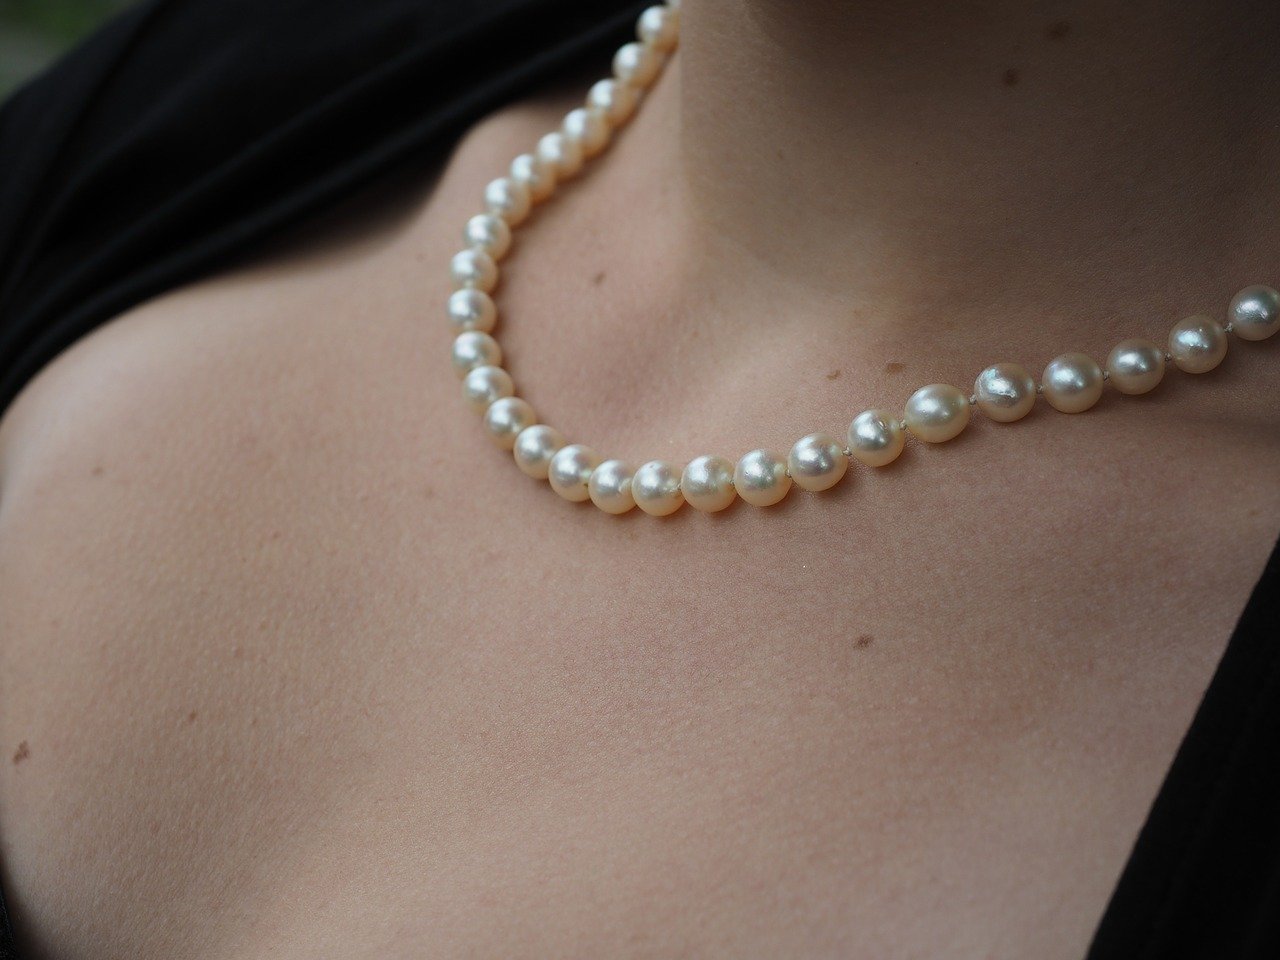 National Wear Your Pearls Day